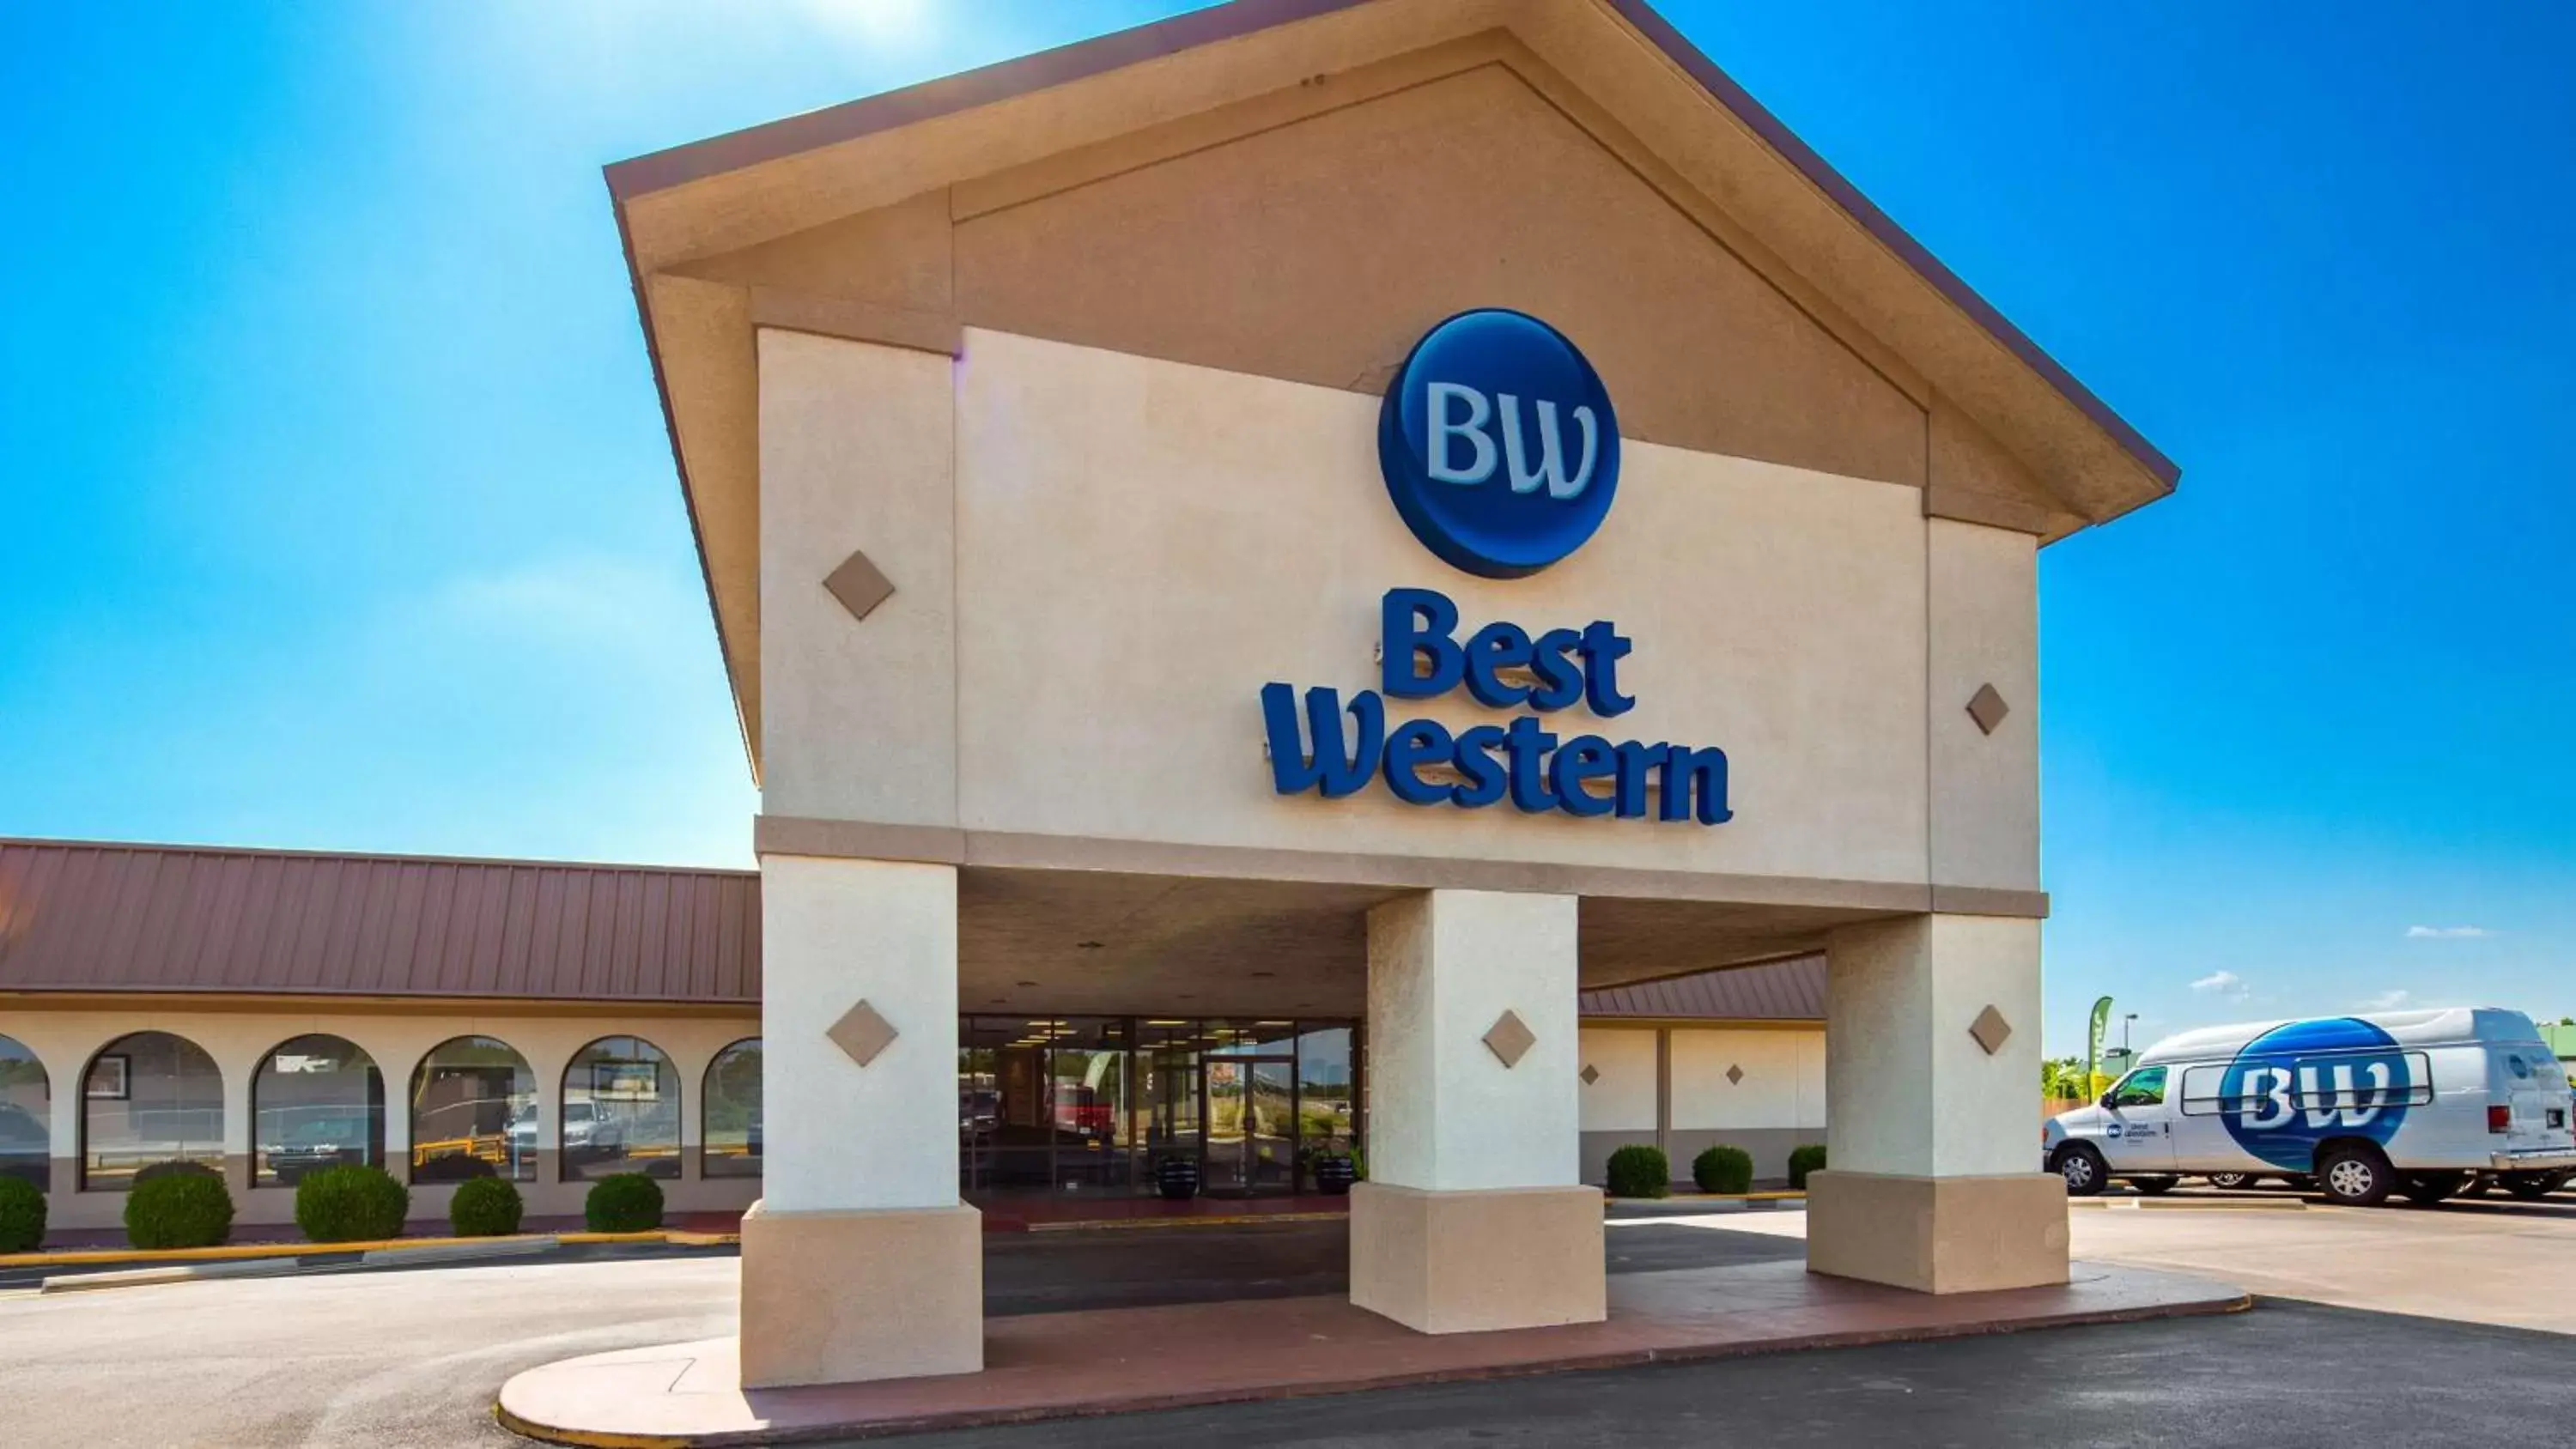 Property Building in Best Western Tulsa Airport